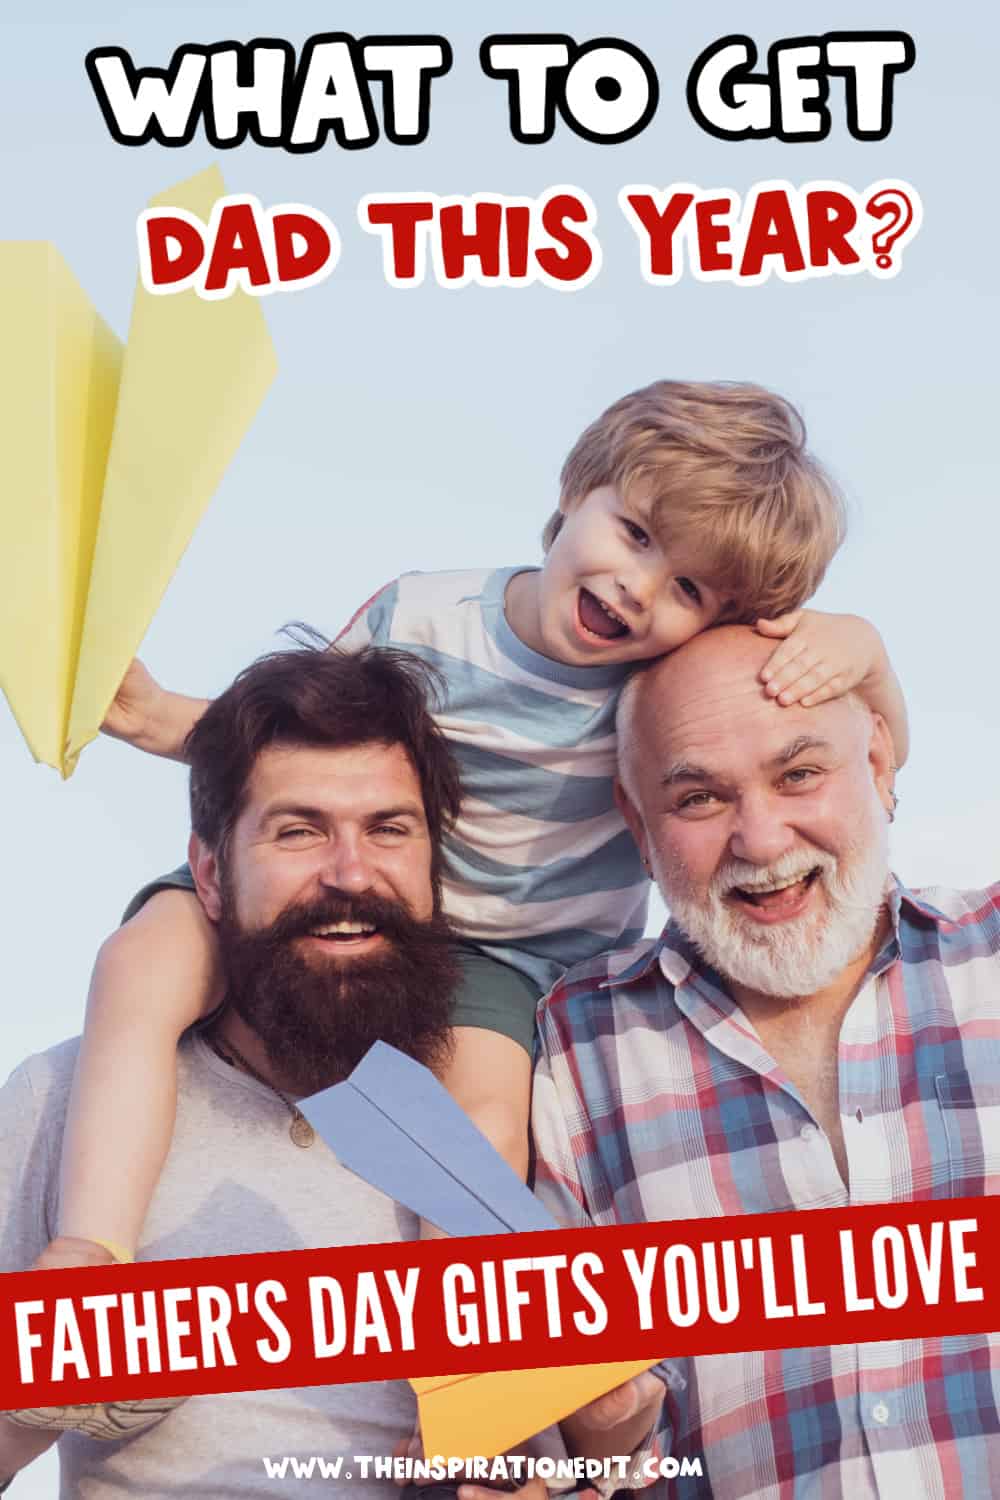 https://www.theinspirationedit.com/wp-content/uploads/2023/04/fathers-day-gifts-.jpg